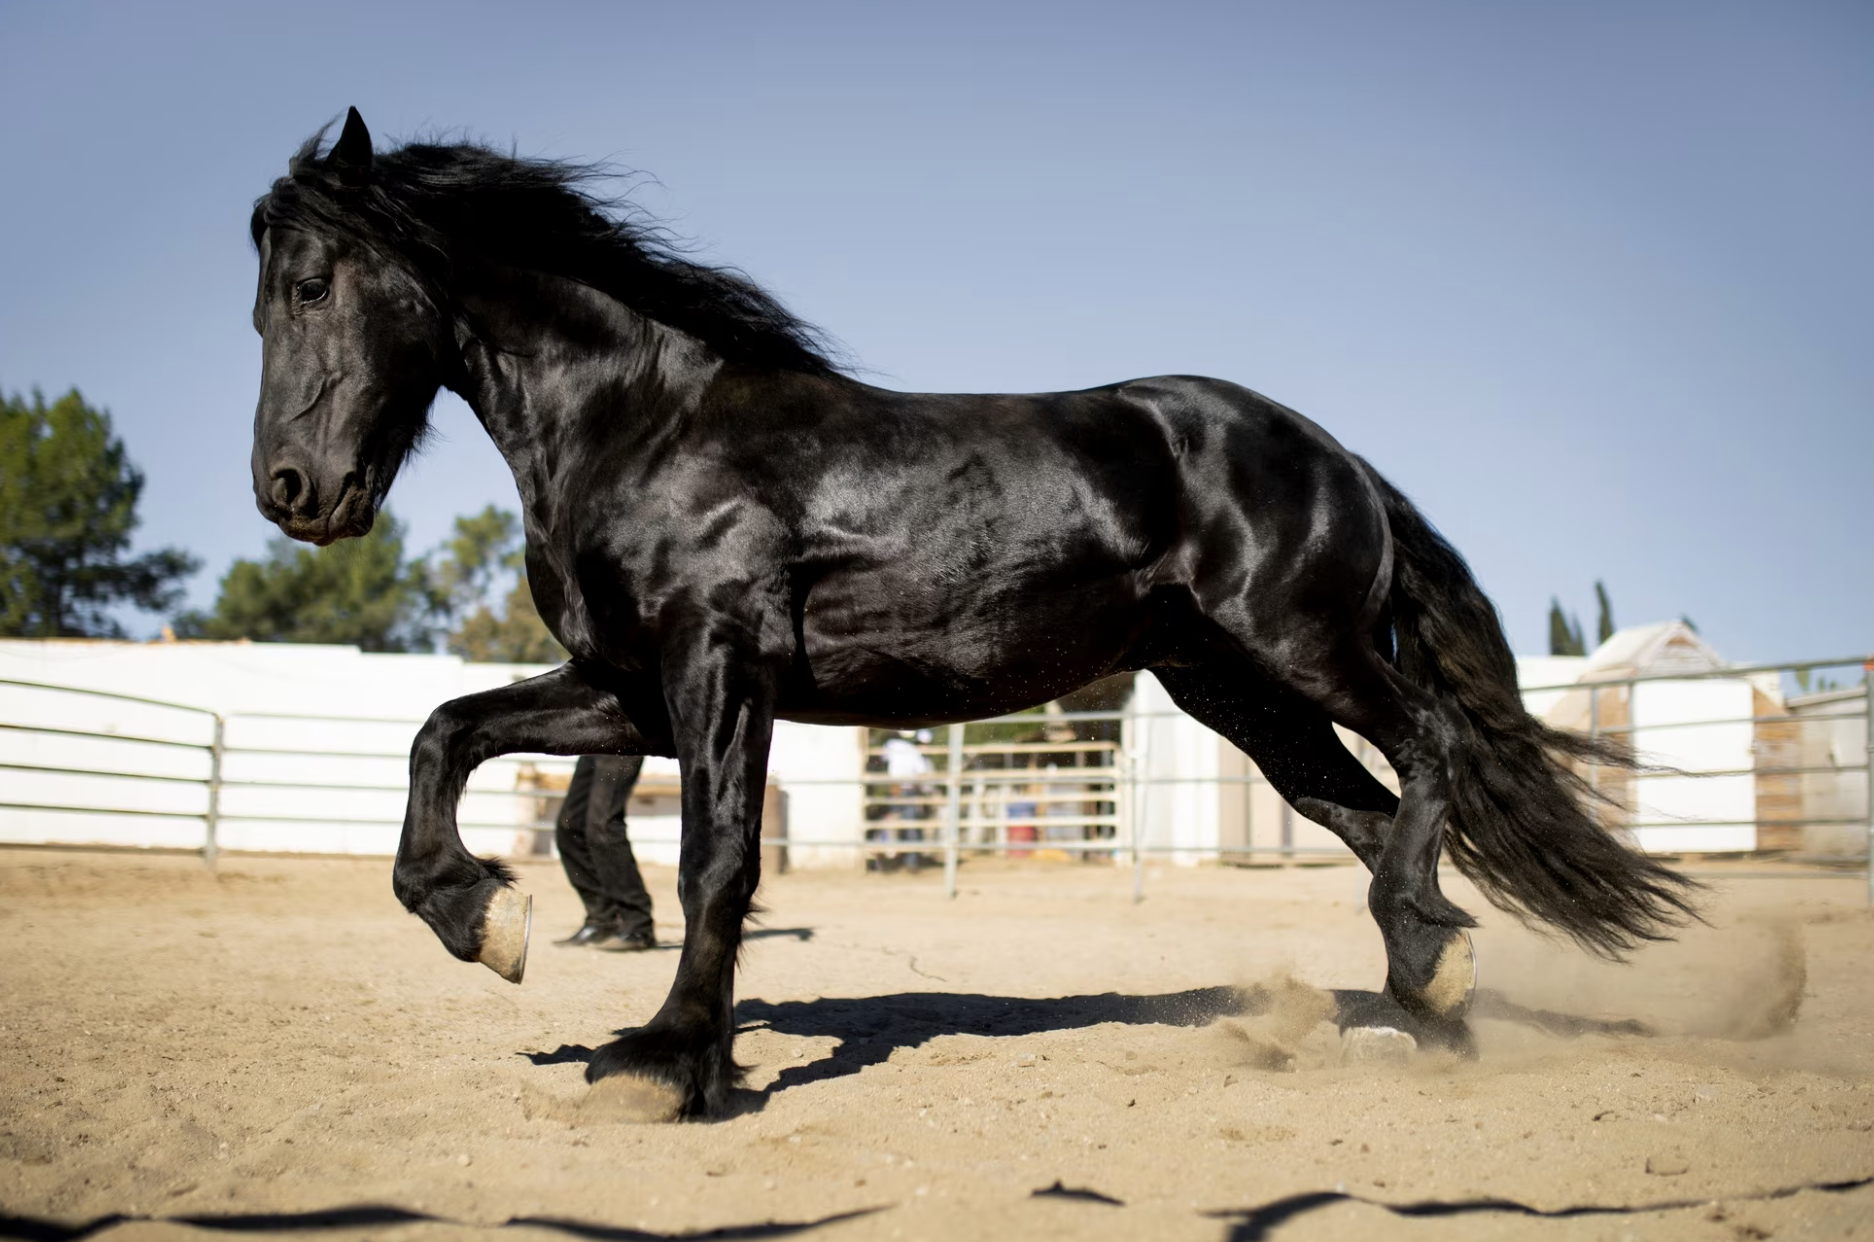 7 Expensive Horse Breeds That Cost More Than a Car